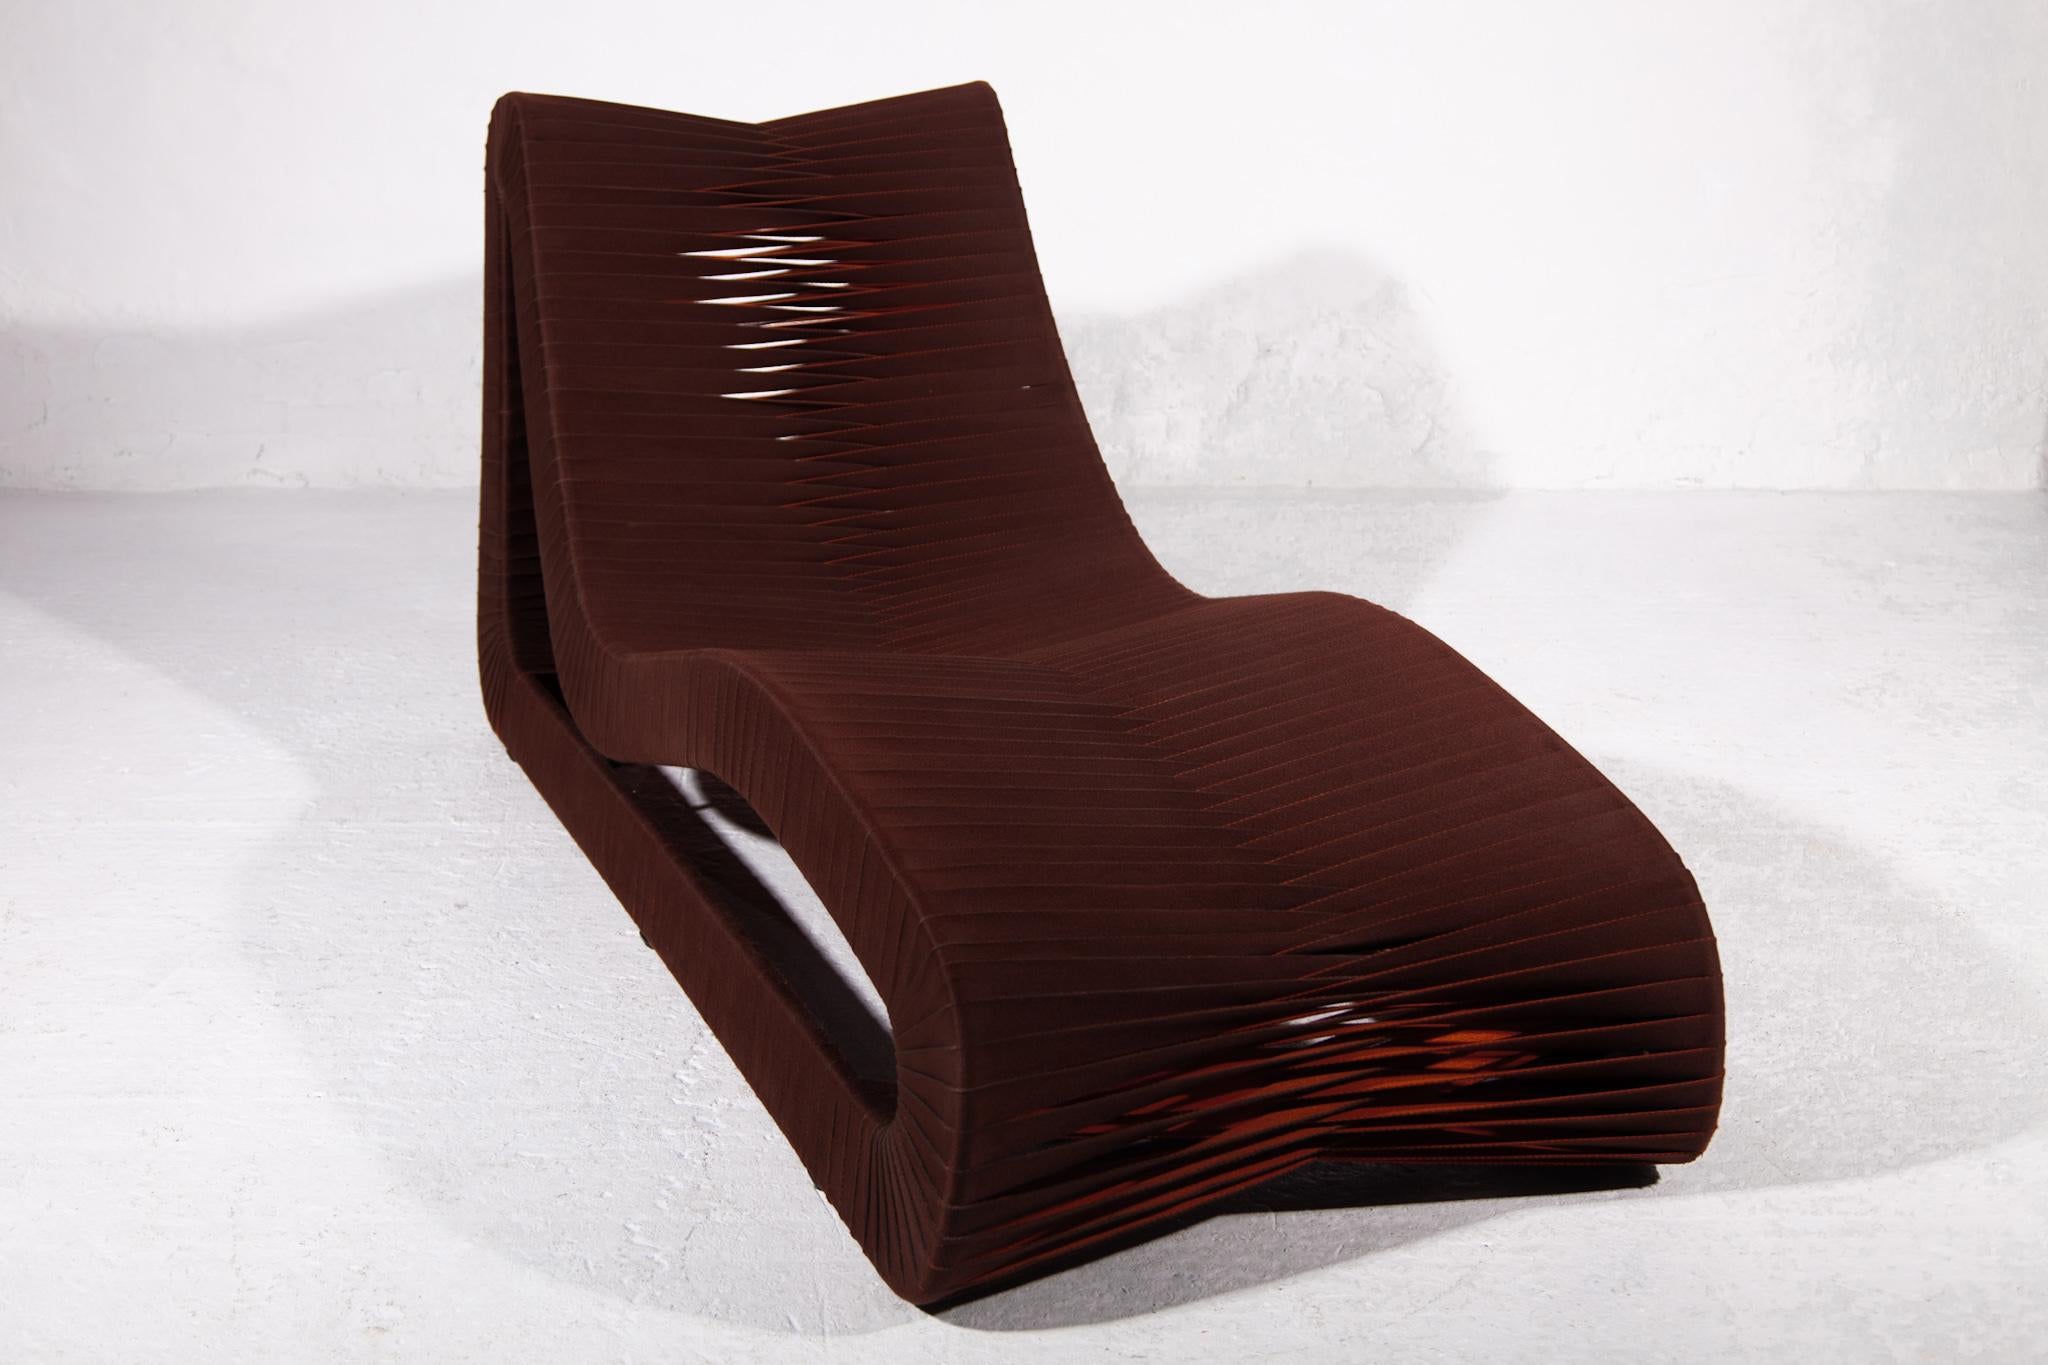 Hand-Crafted Mid-Century Modern Soft Ergodynamic Daybed, Lounge Chair For Sale